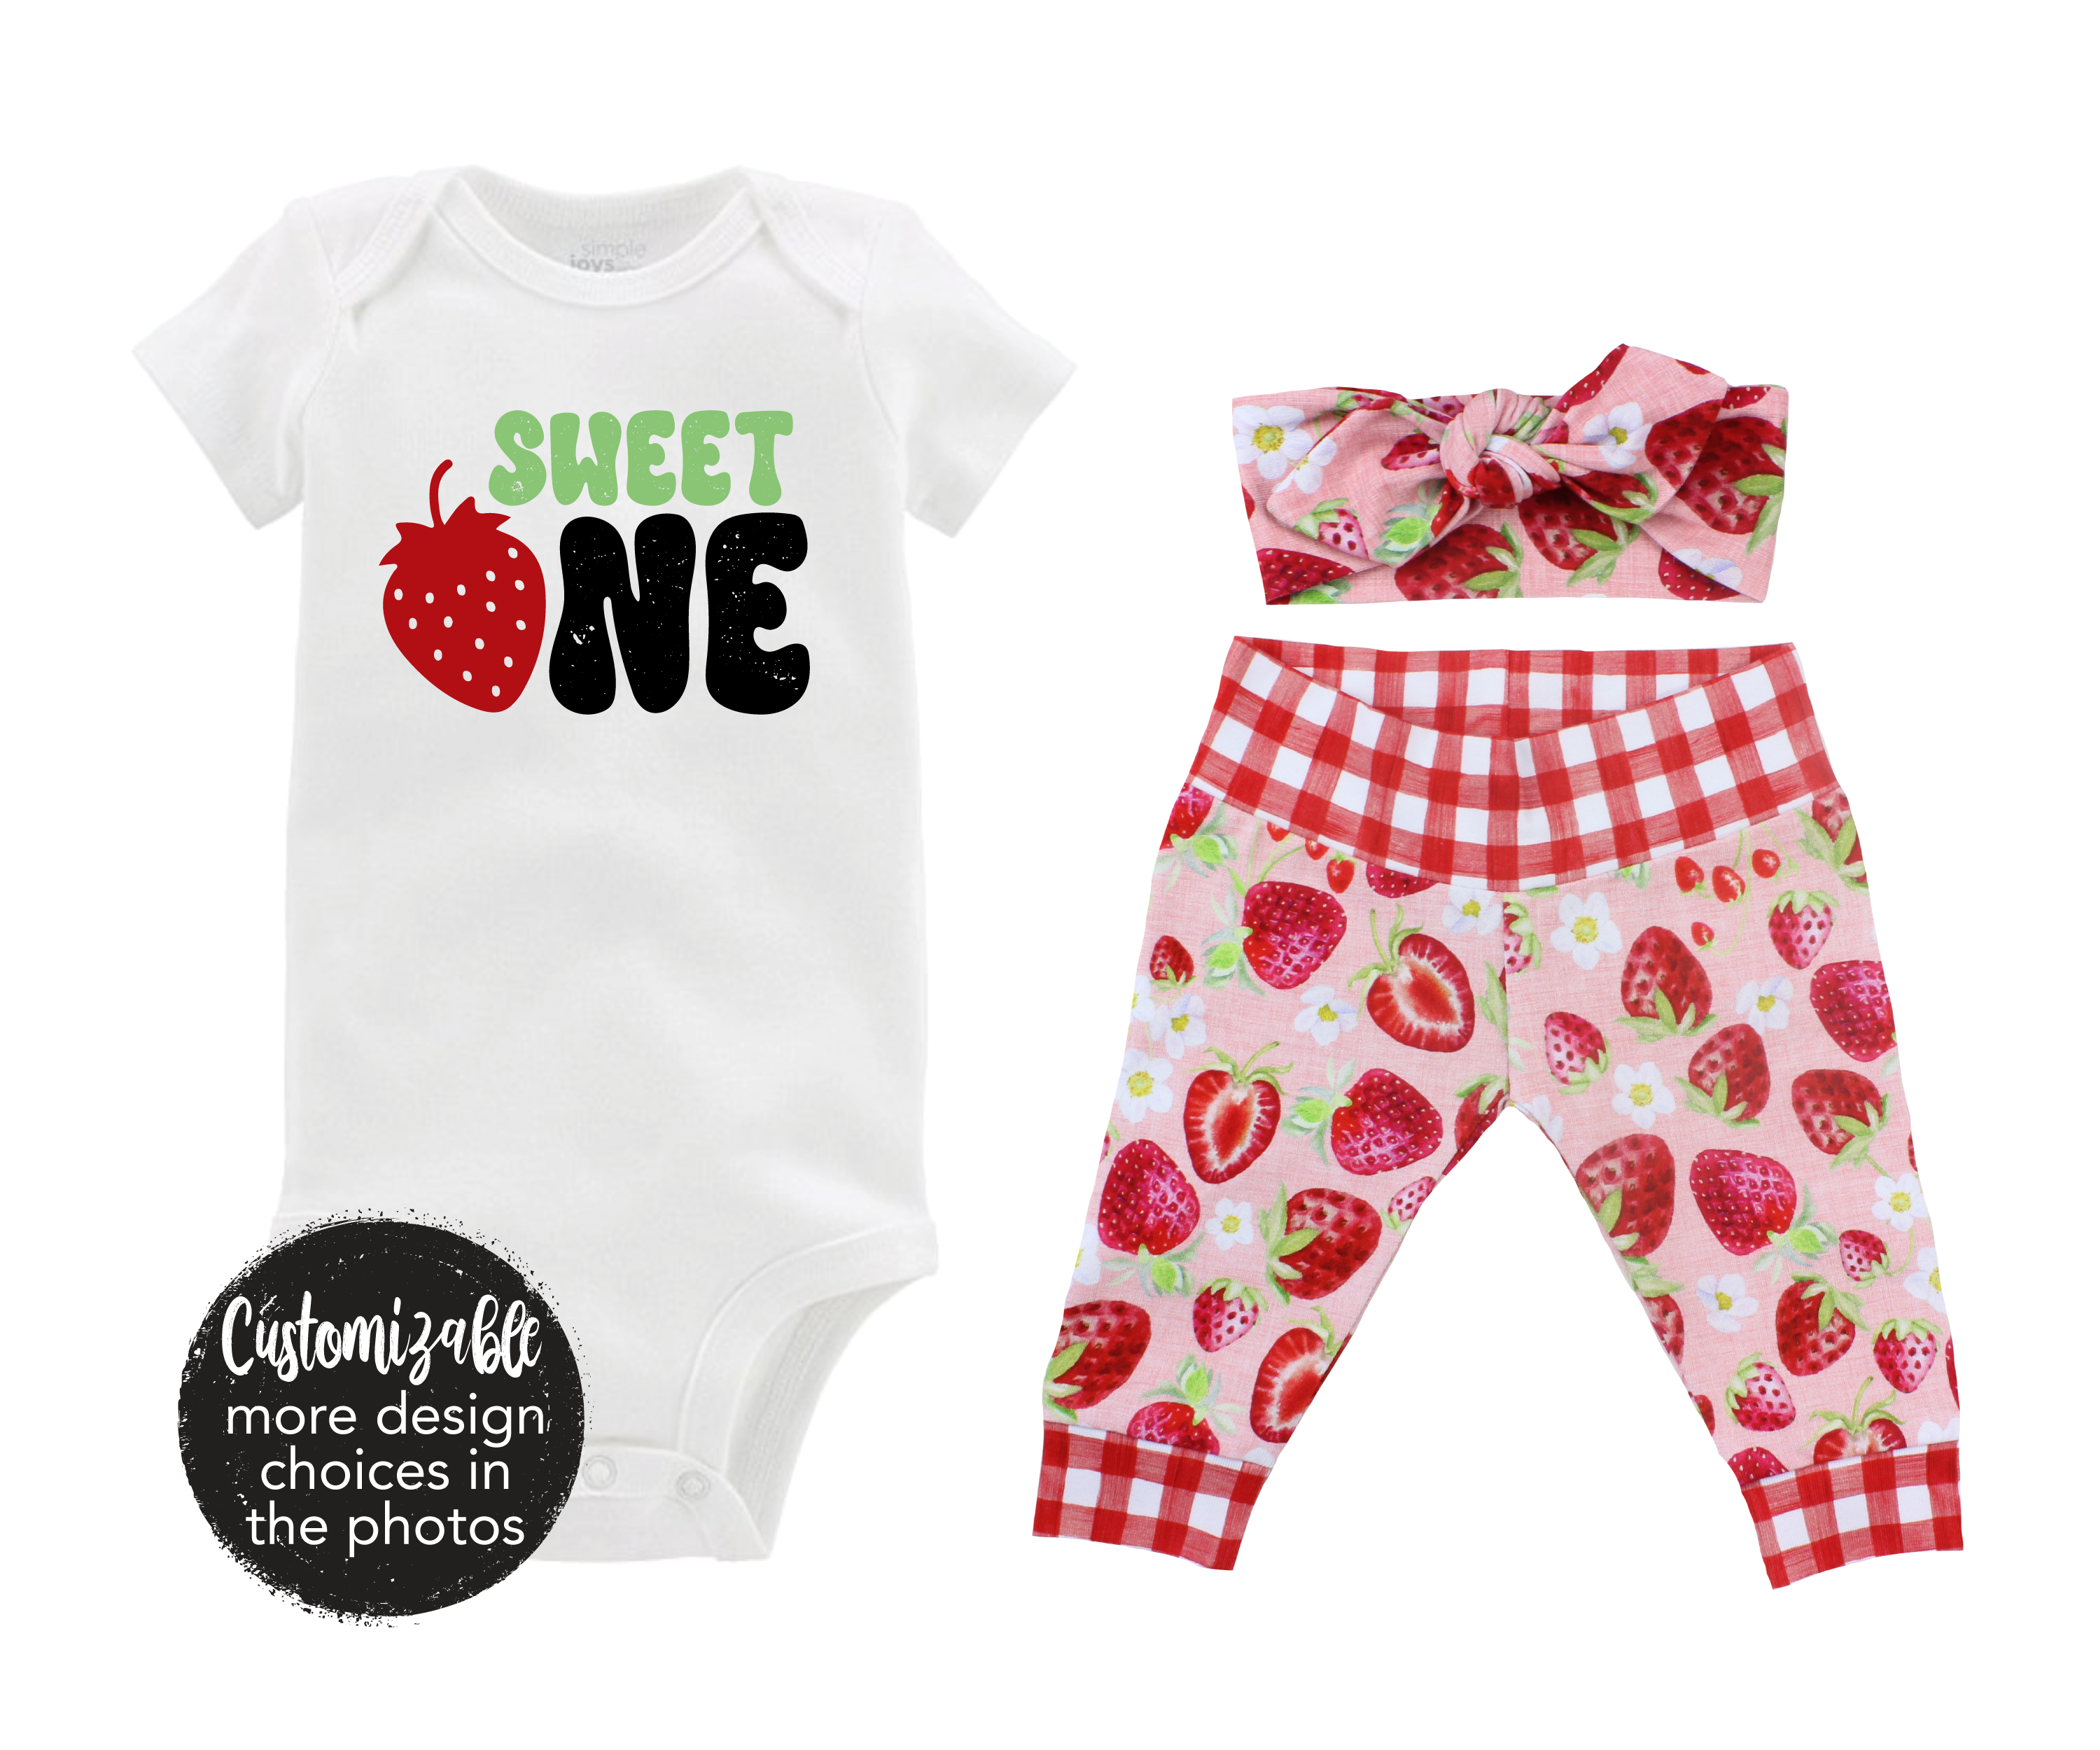 So Berry Loved Pink Red Strawberry Spring Summer Baby Girl Outfit